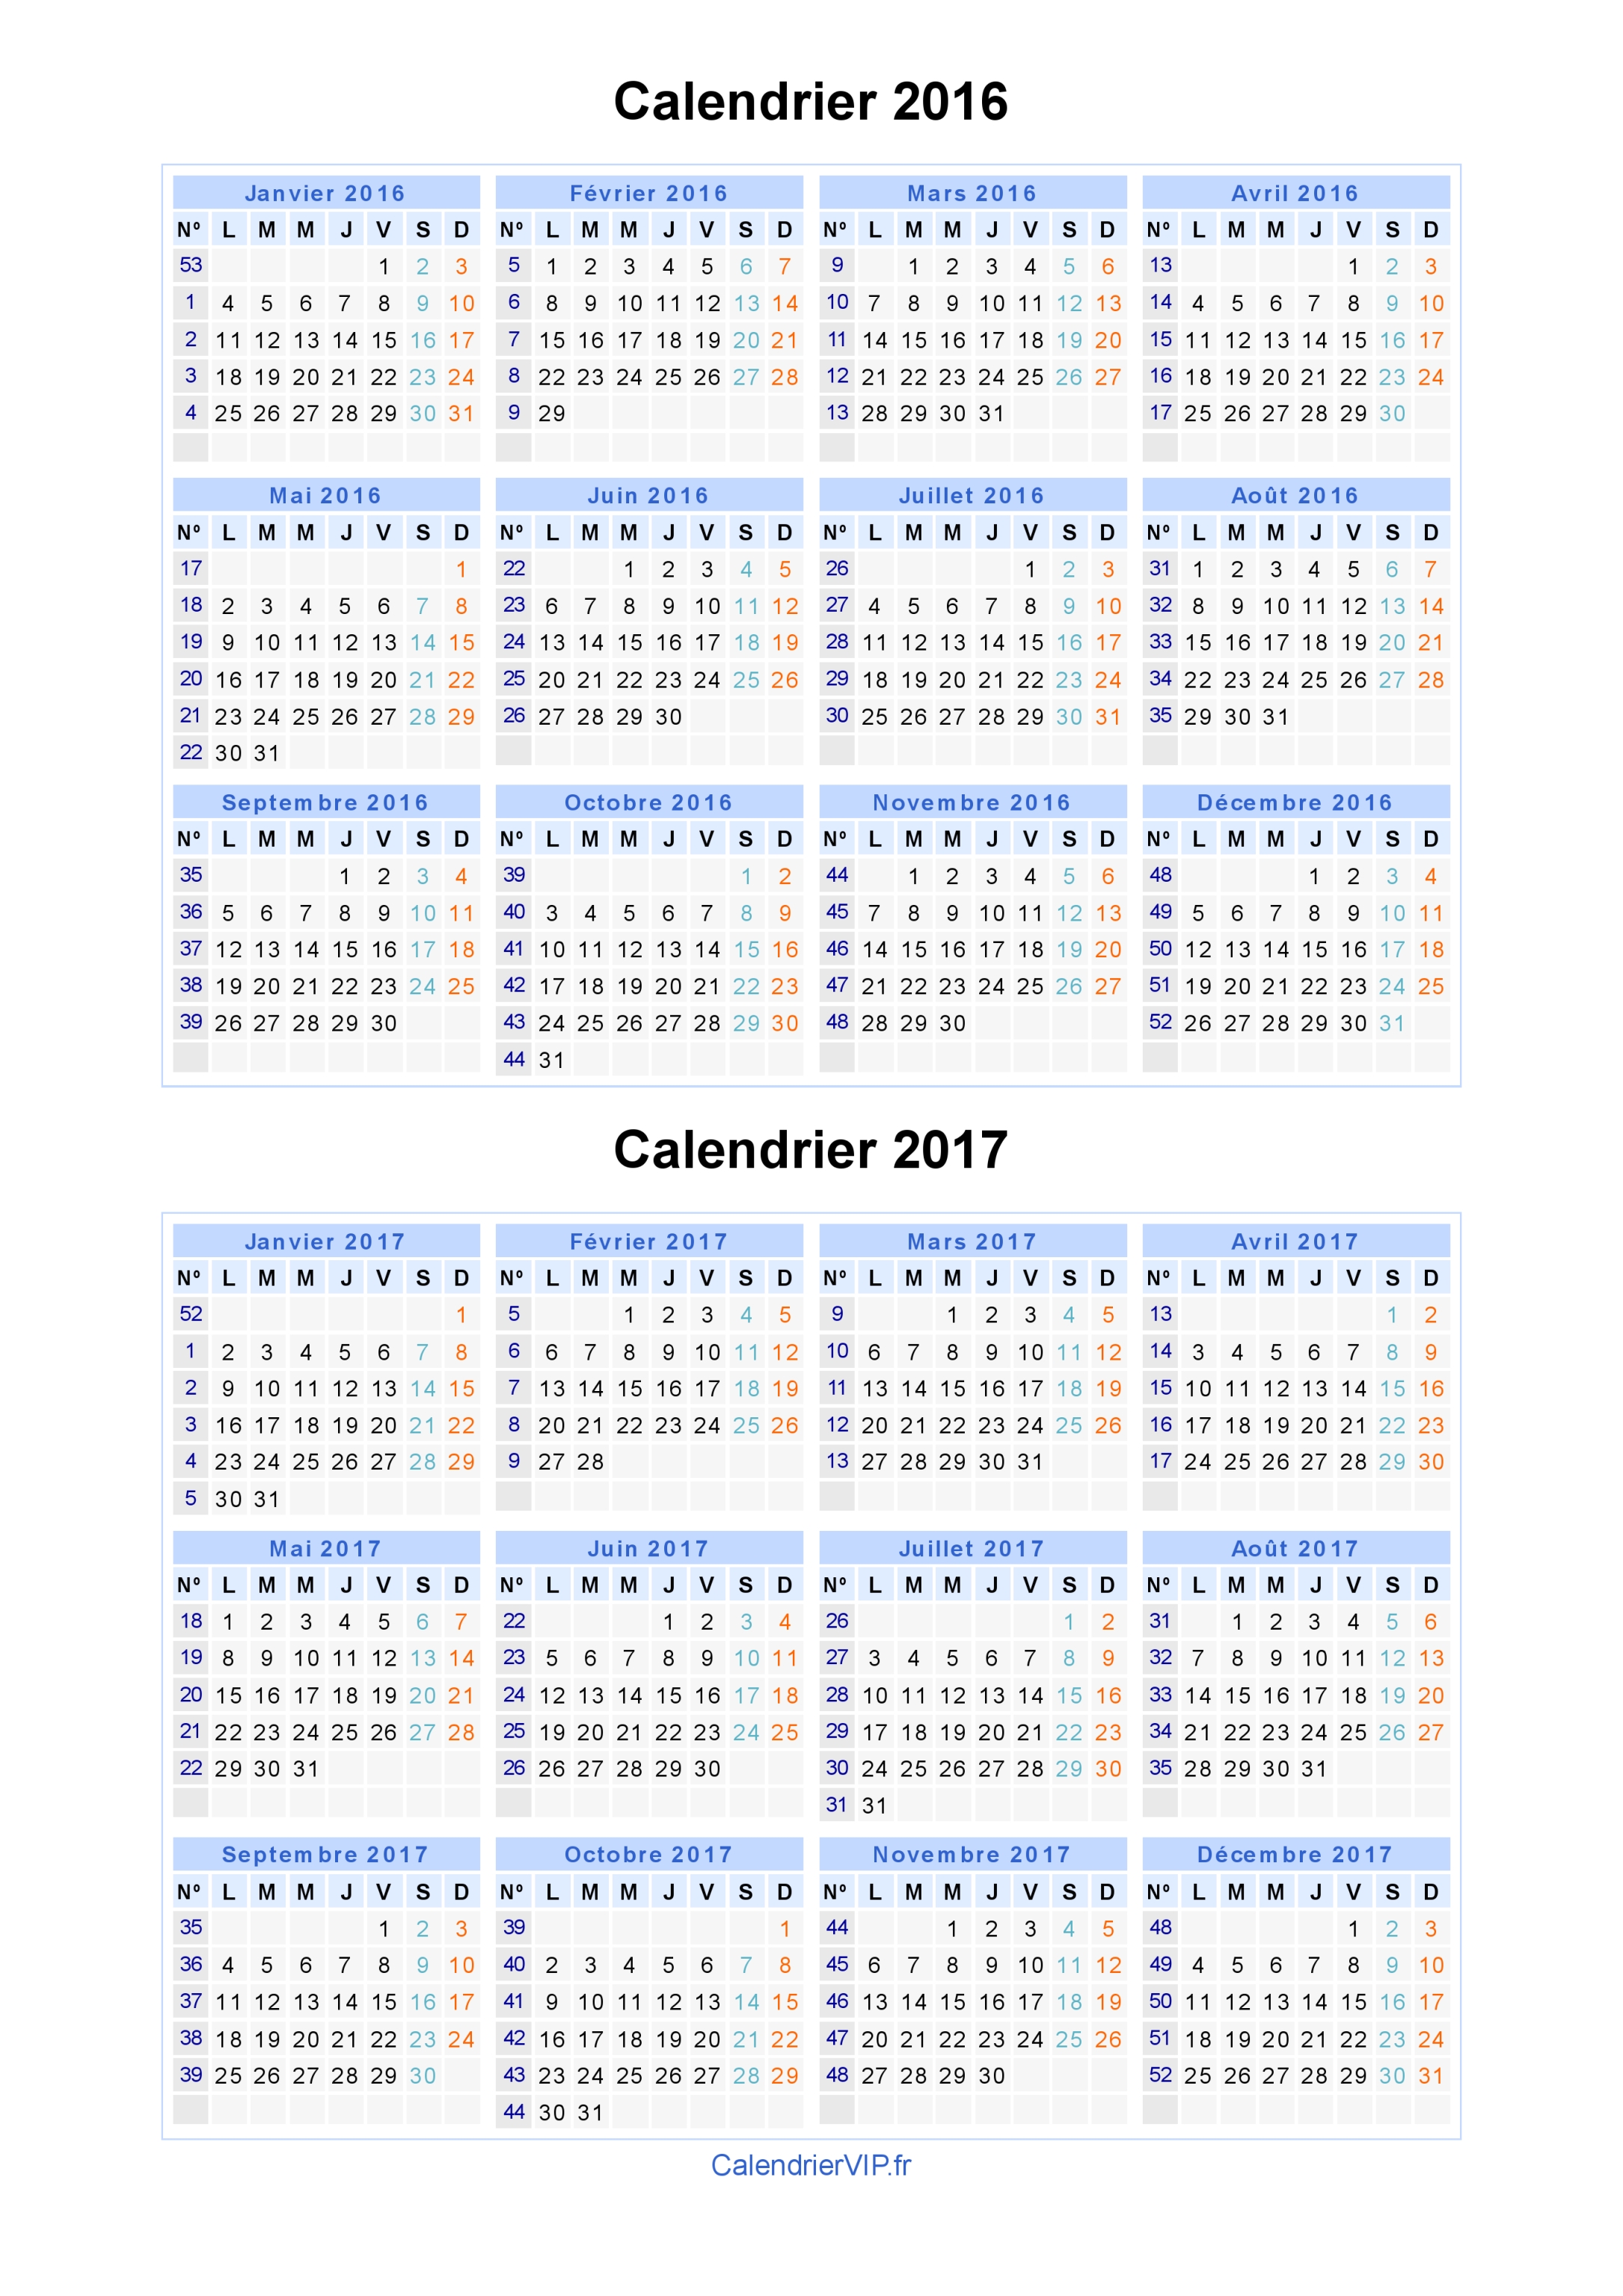 Exemple calendrier 2016